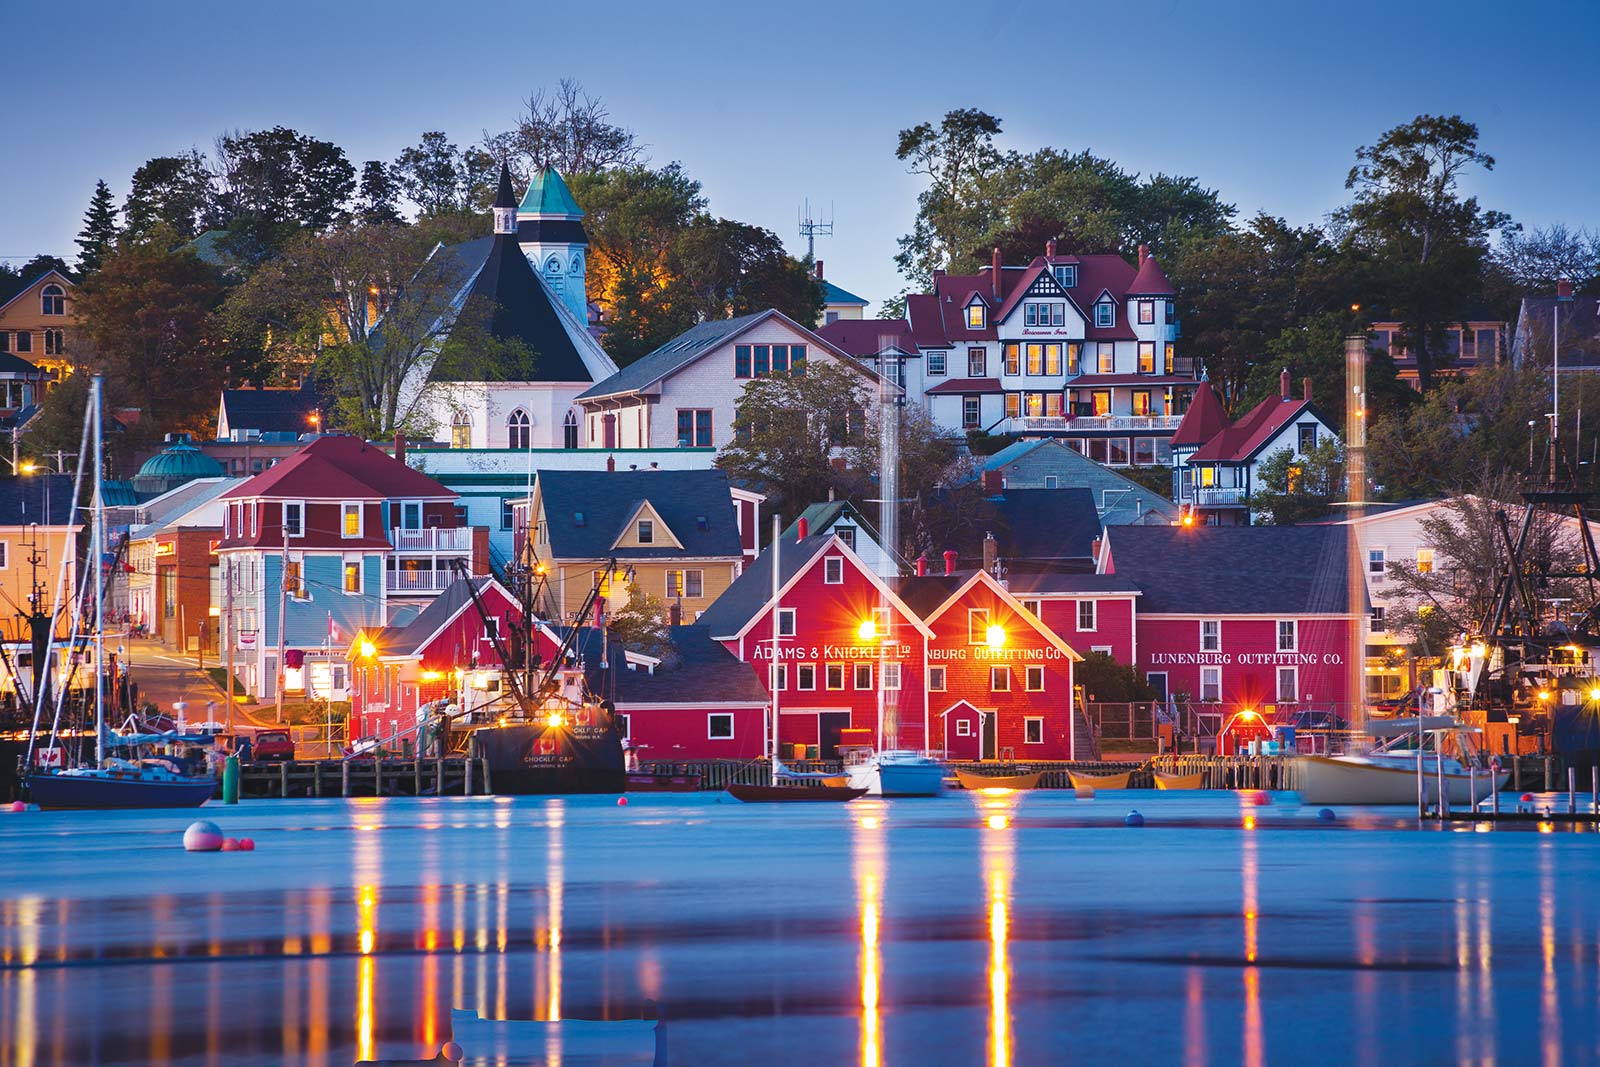 Stroll the charming streets of Lunenburg Protected as a UNESCO World Heritage - photo 16